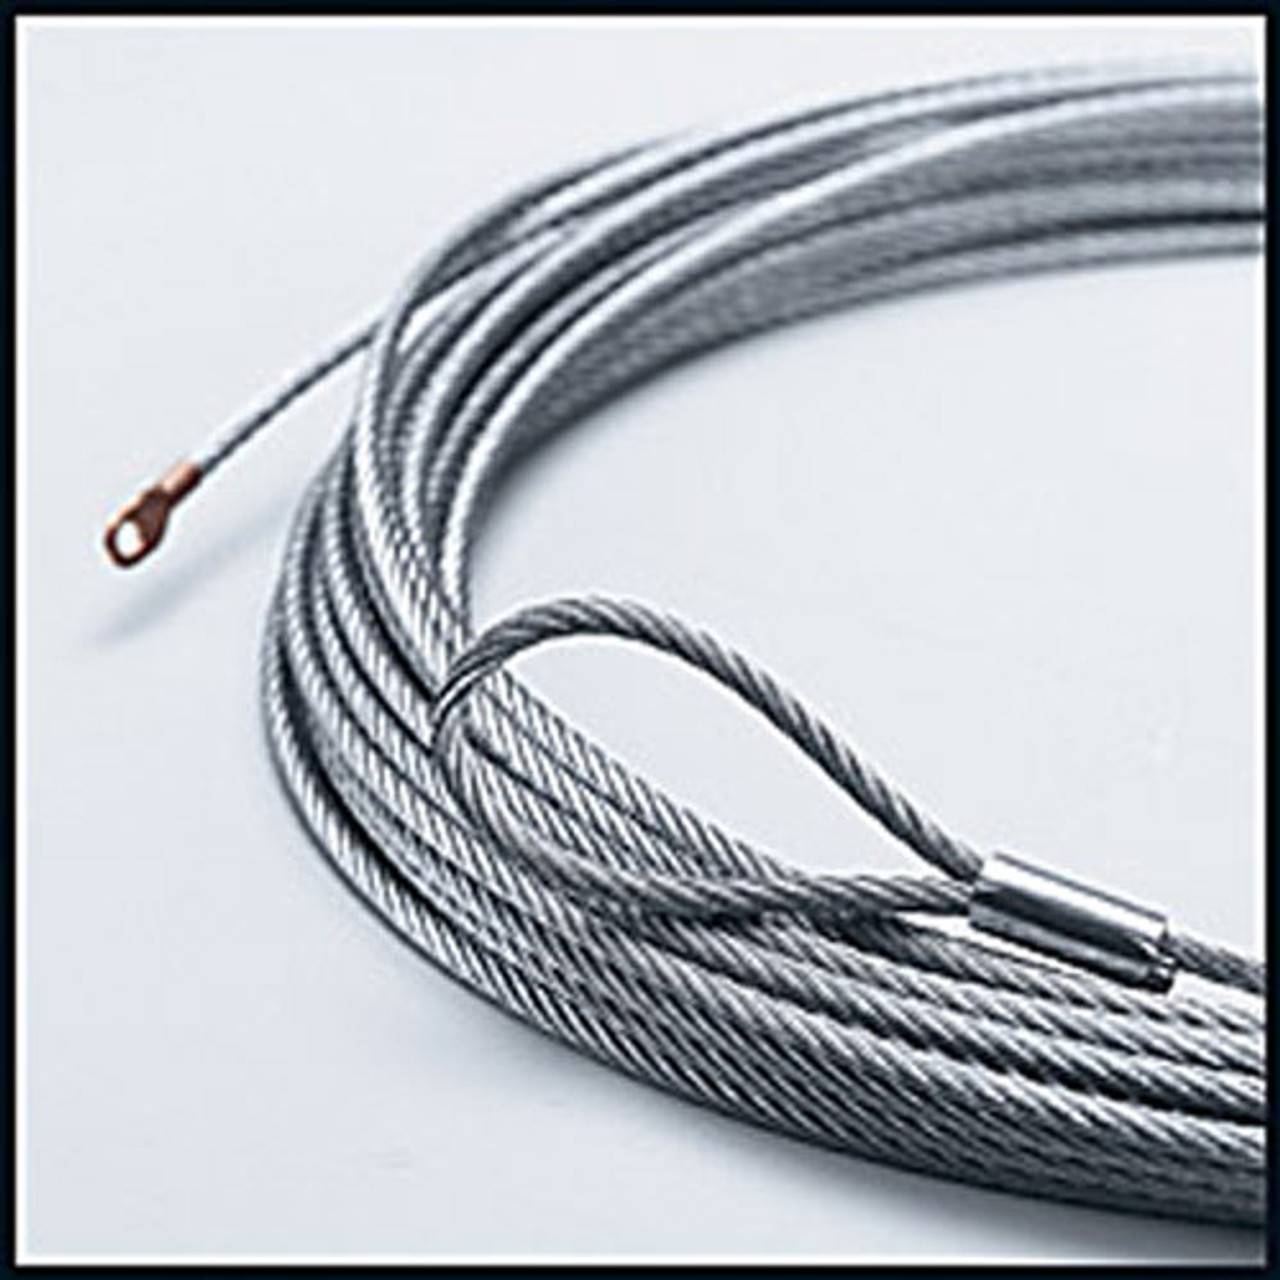 Replacement Rope - 72495